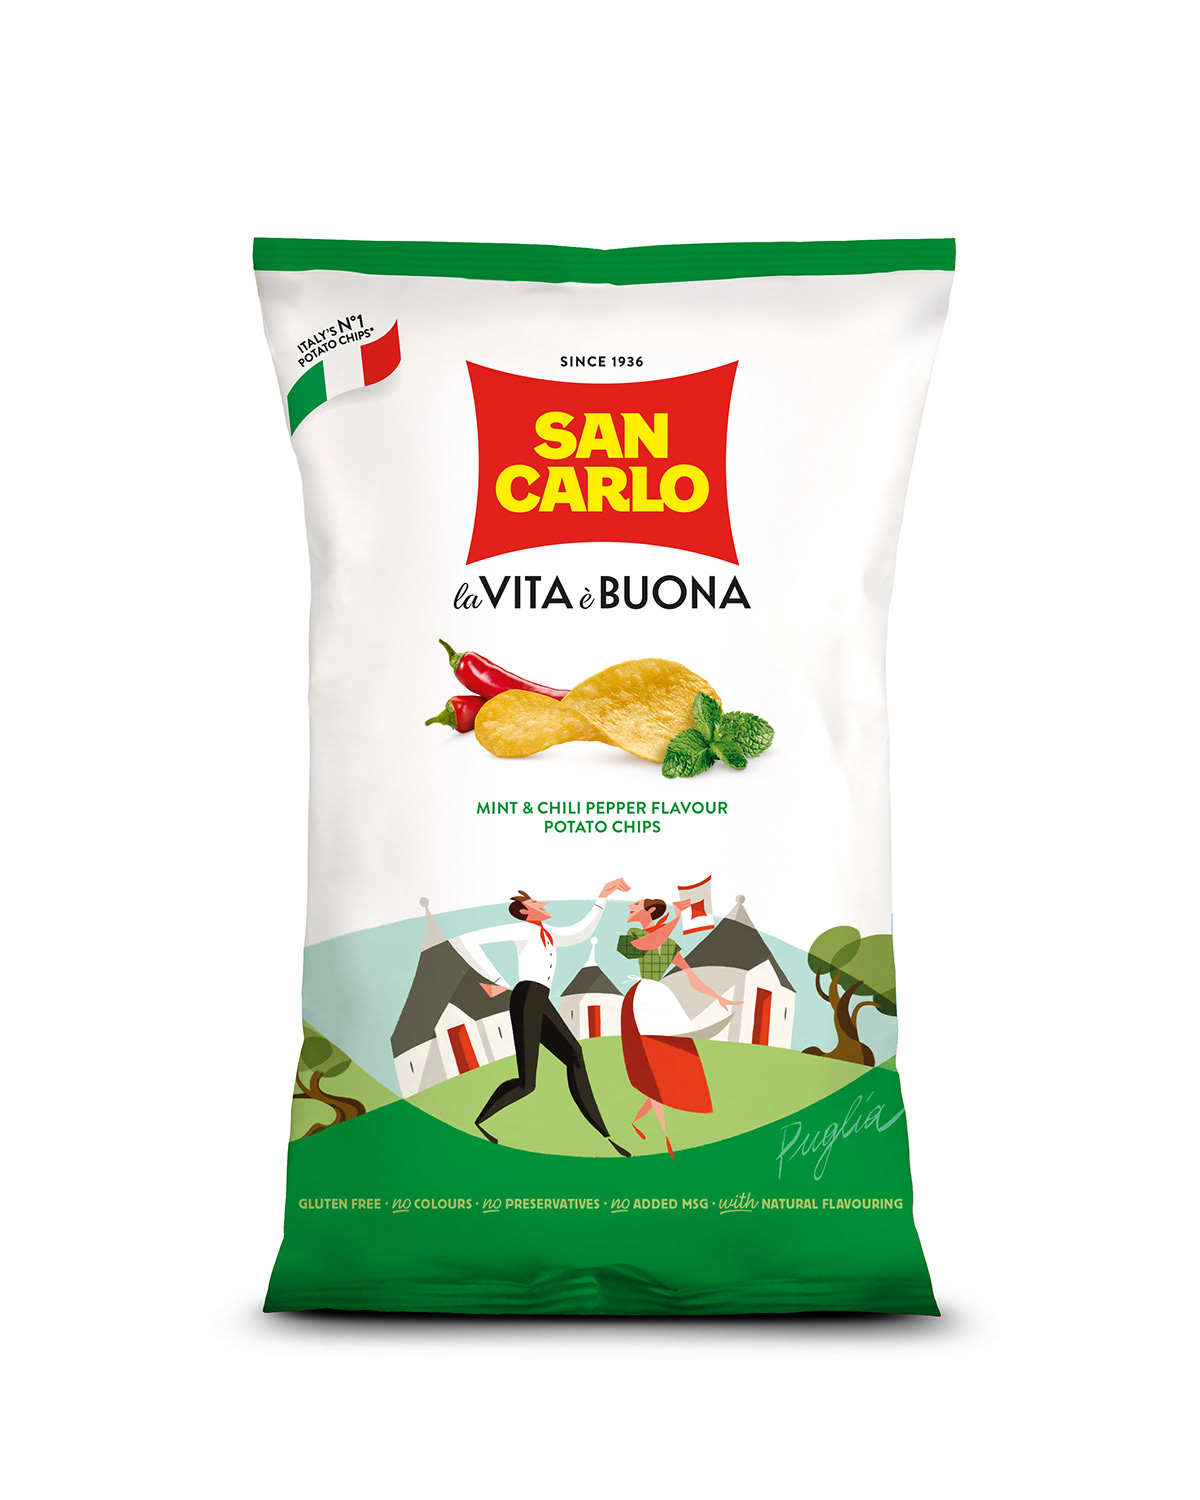 aperitivo chips foodie Italy MADEINITALY Packaging sancarlo snack